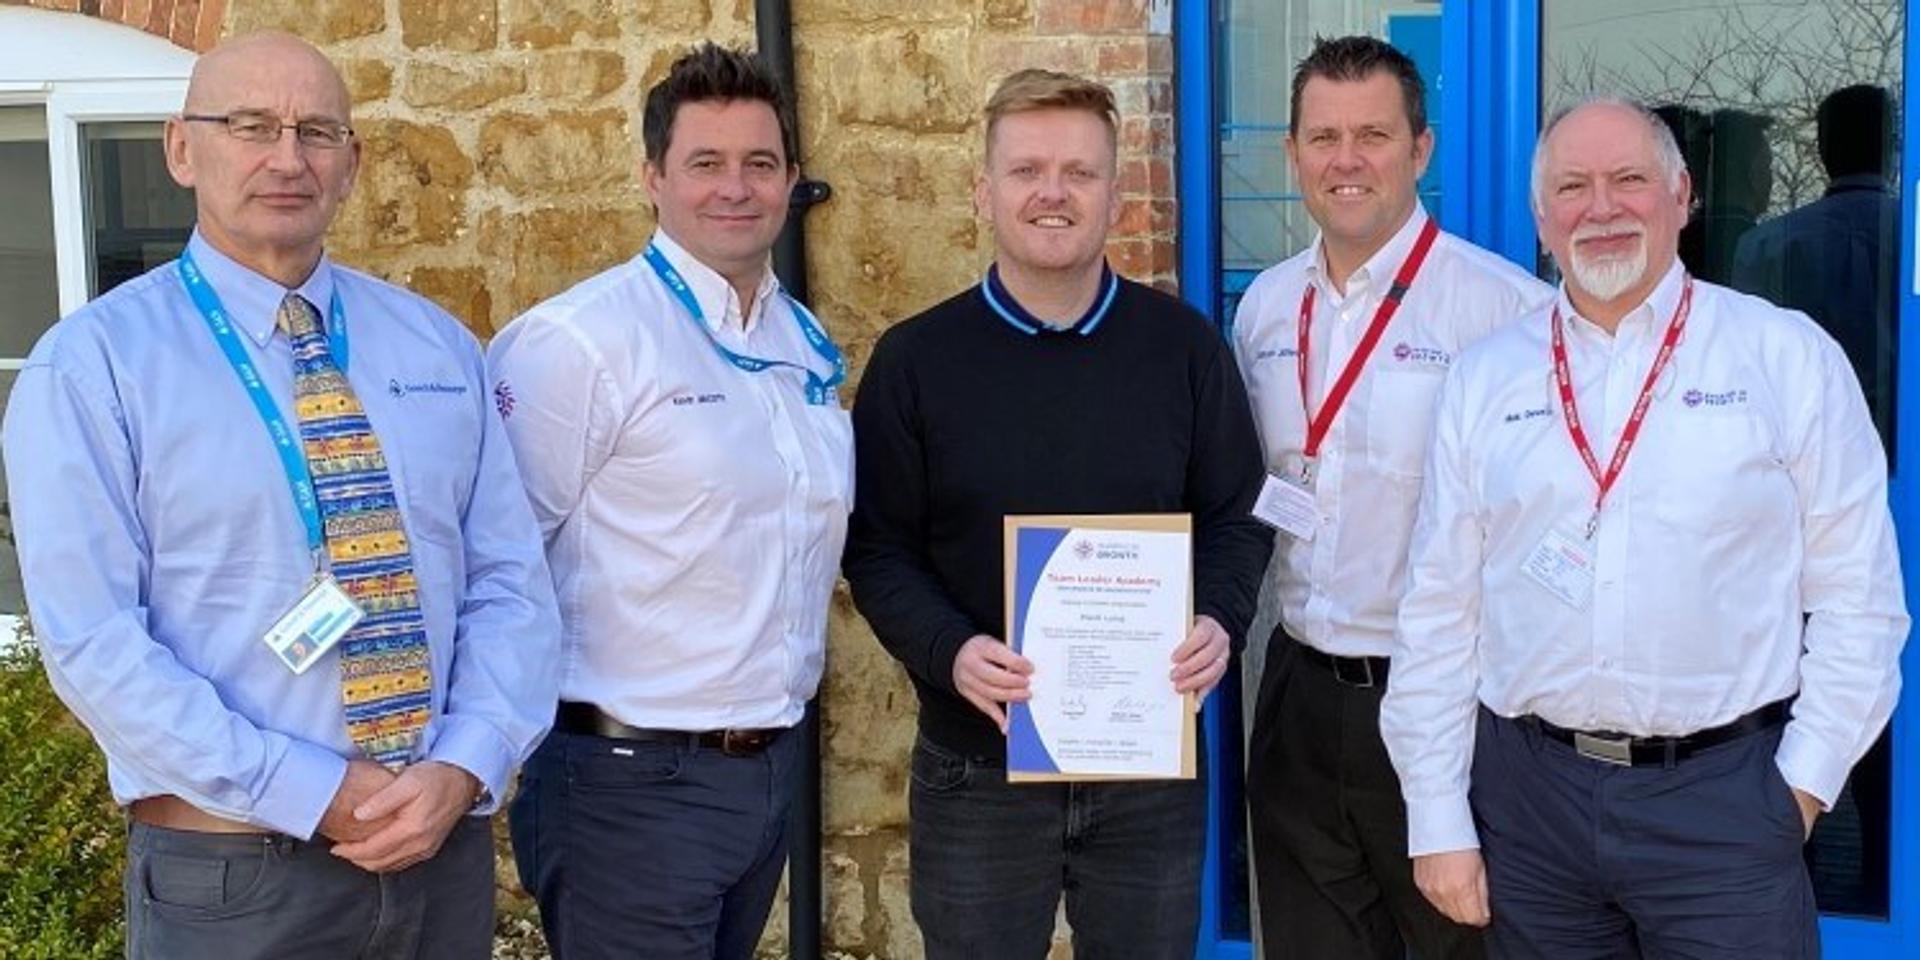 Barry Luke handing over Mark’s certificate witnessed by (L-R) SiG business transformation coach Kev McCarthy, operations executive Malcolm James and board member Nick Devey